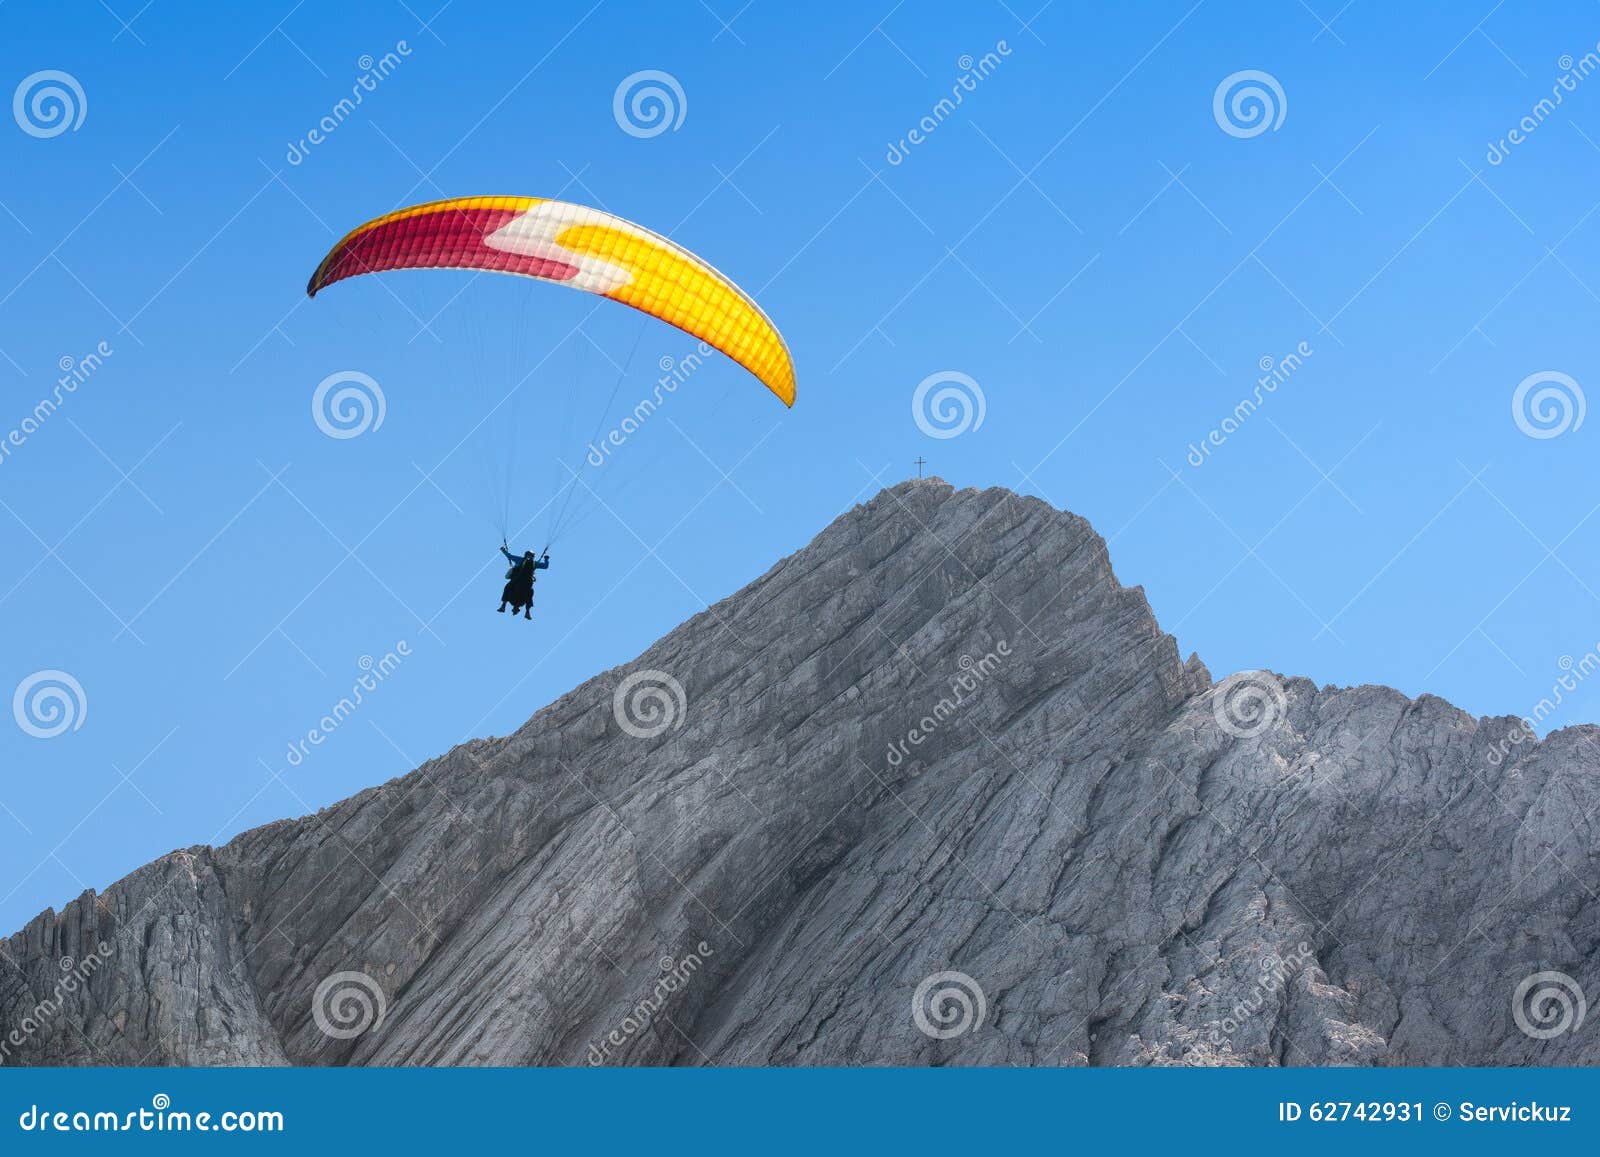 paraglider free soaring in cloudless sky over dolomites alpine m